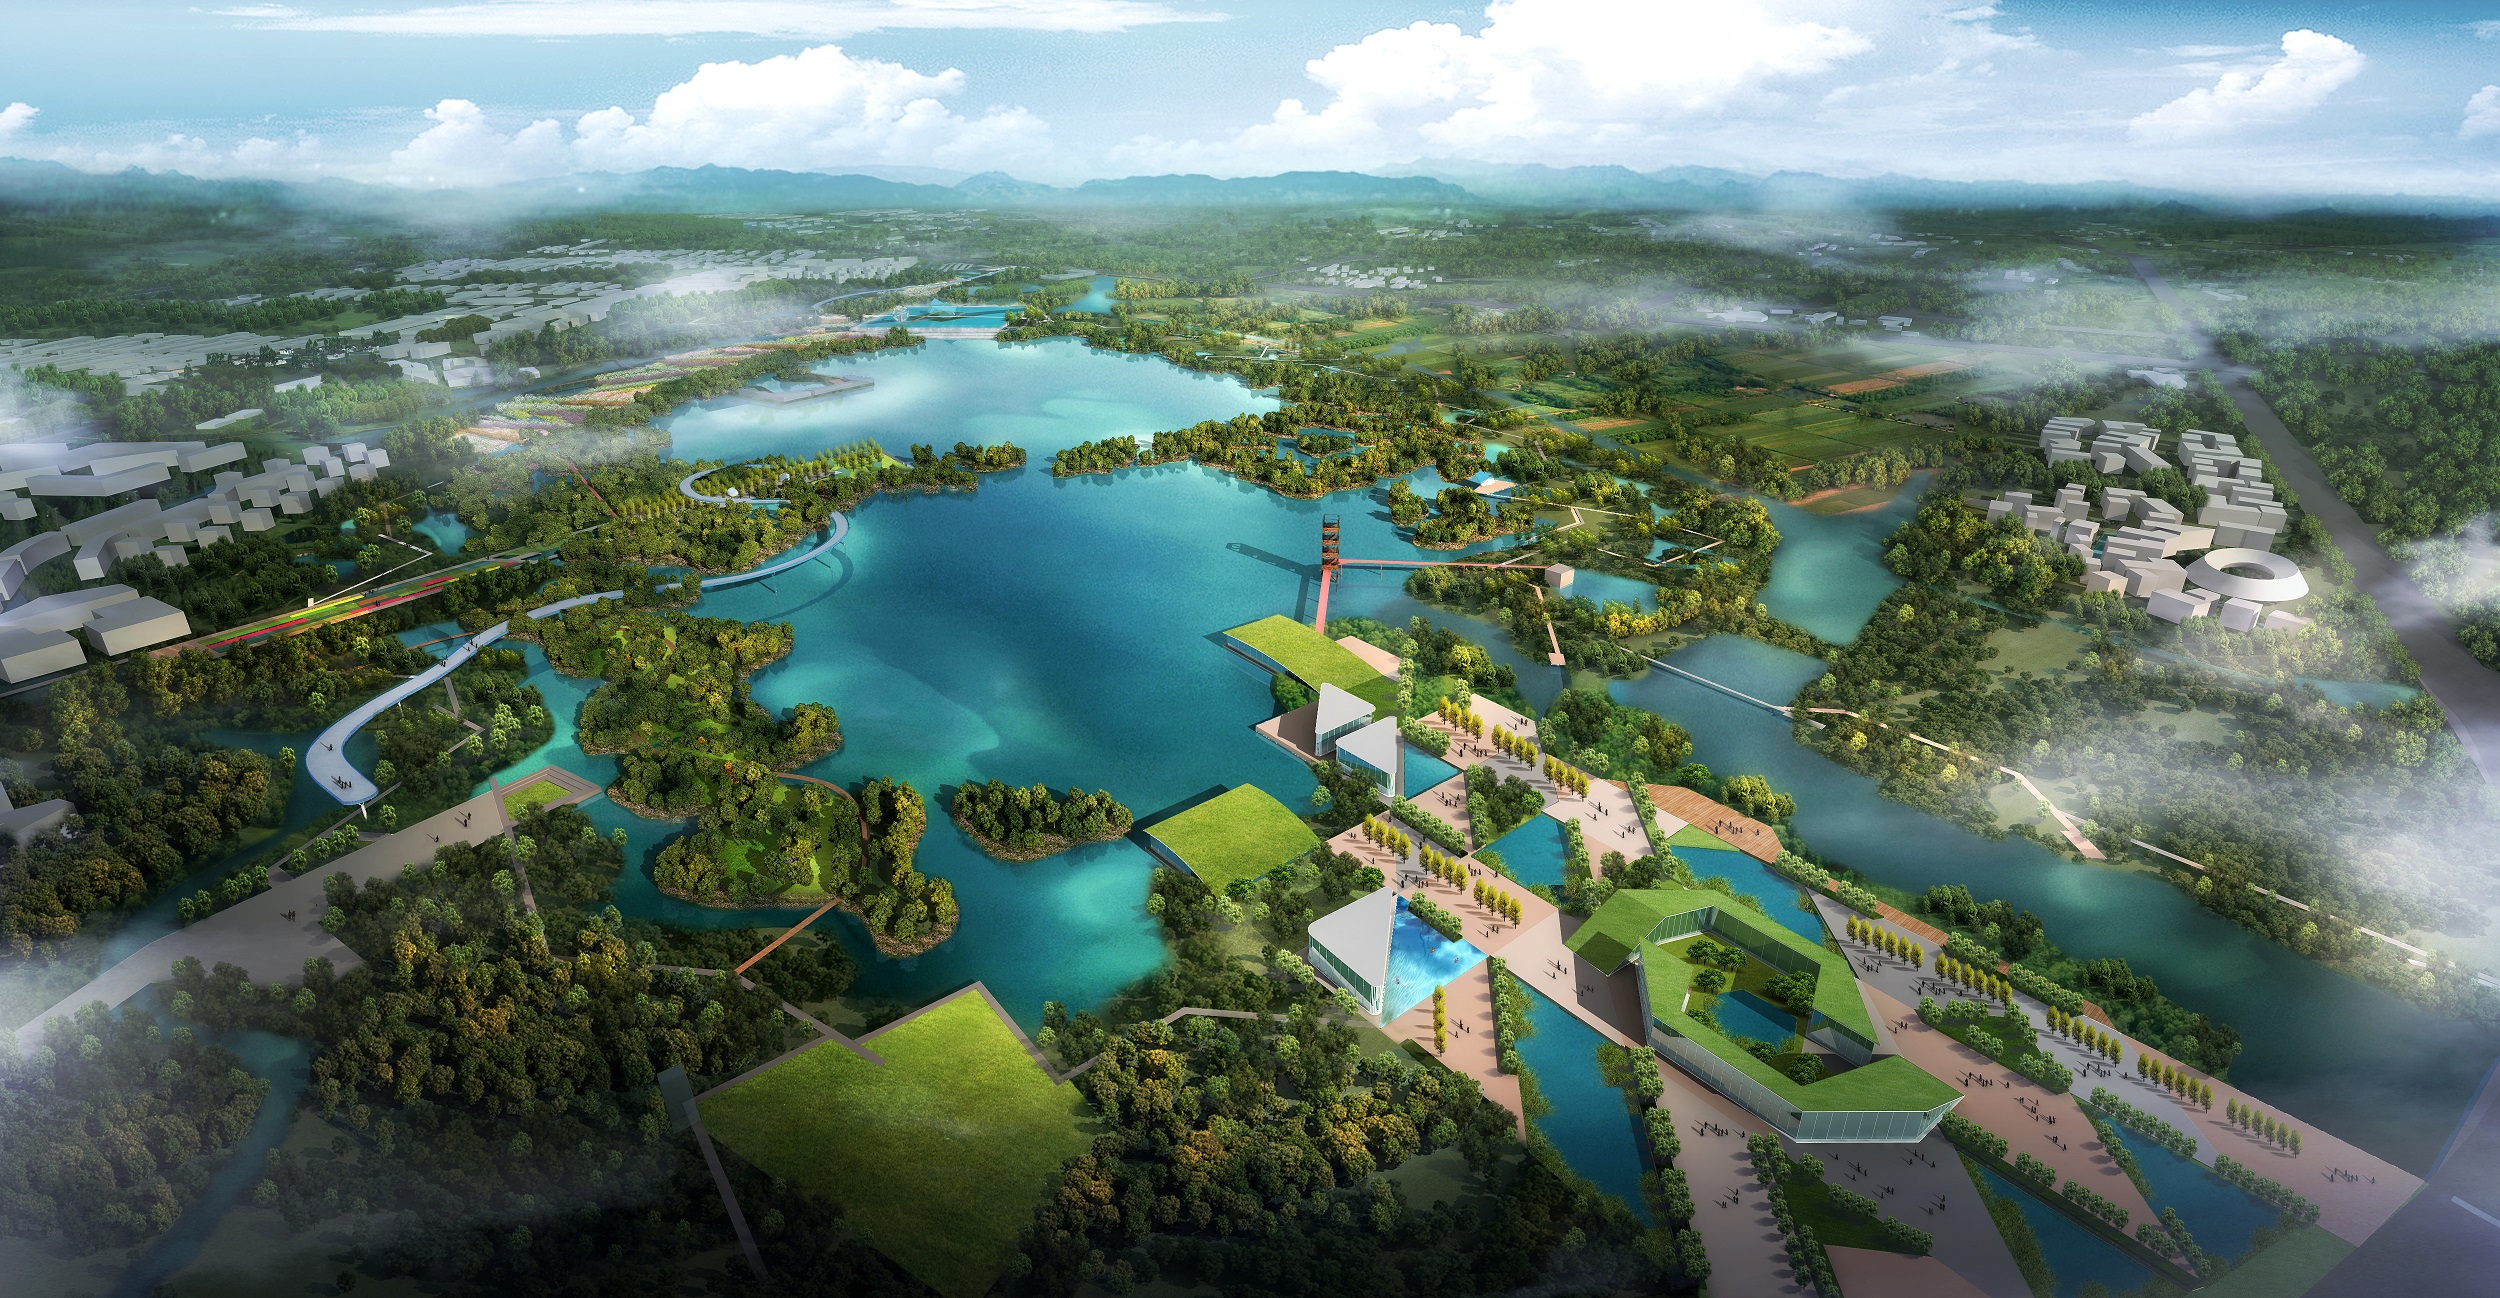 Integrated Landscape Design with Ecological Water Management Yixing Master planning Concept Residential